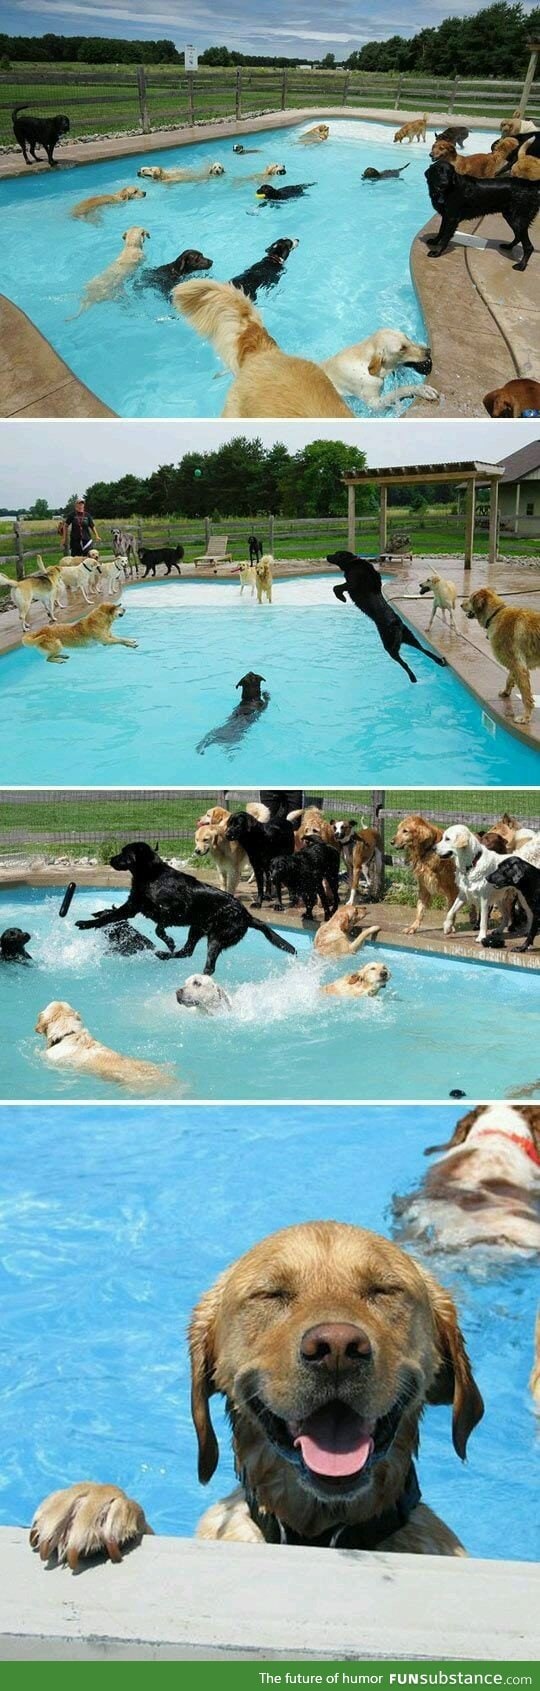 Dog pool party!